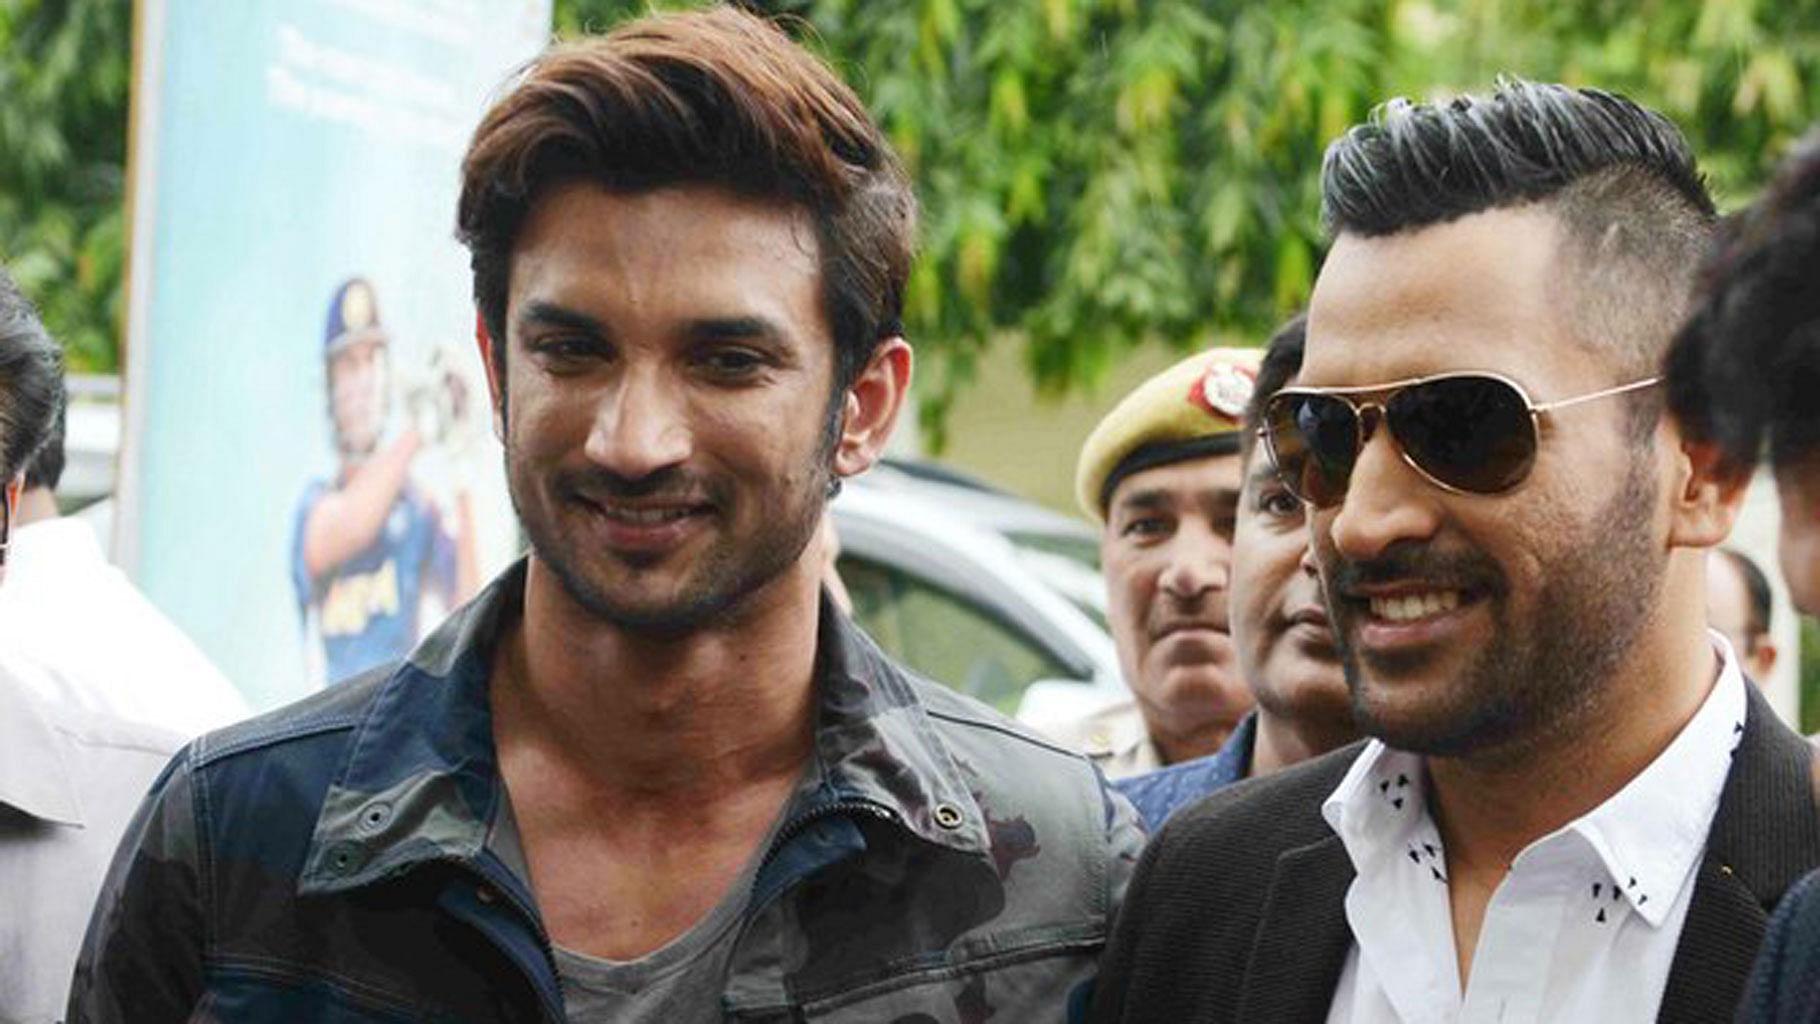 According to a media report, MS Dhoni was ‘shattered’ after hearing the news of Sushant Singh Rajput’s demise.